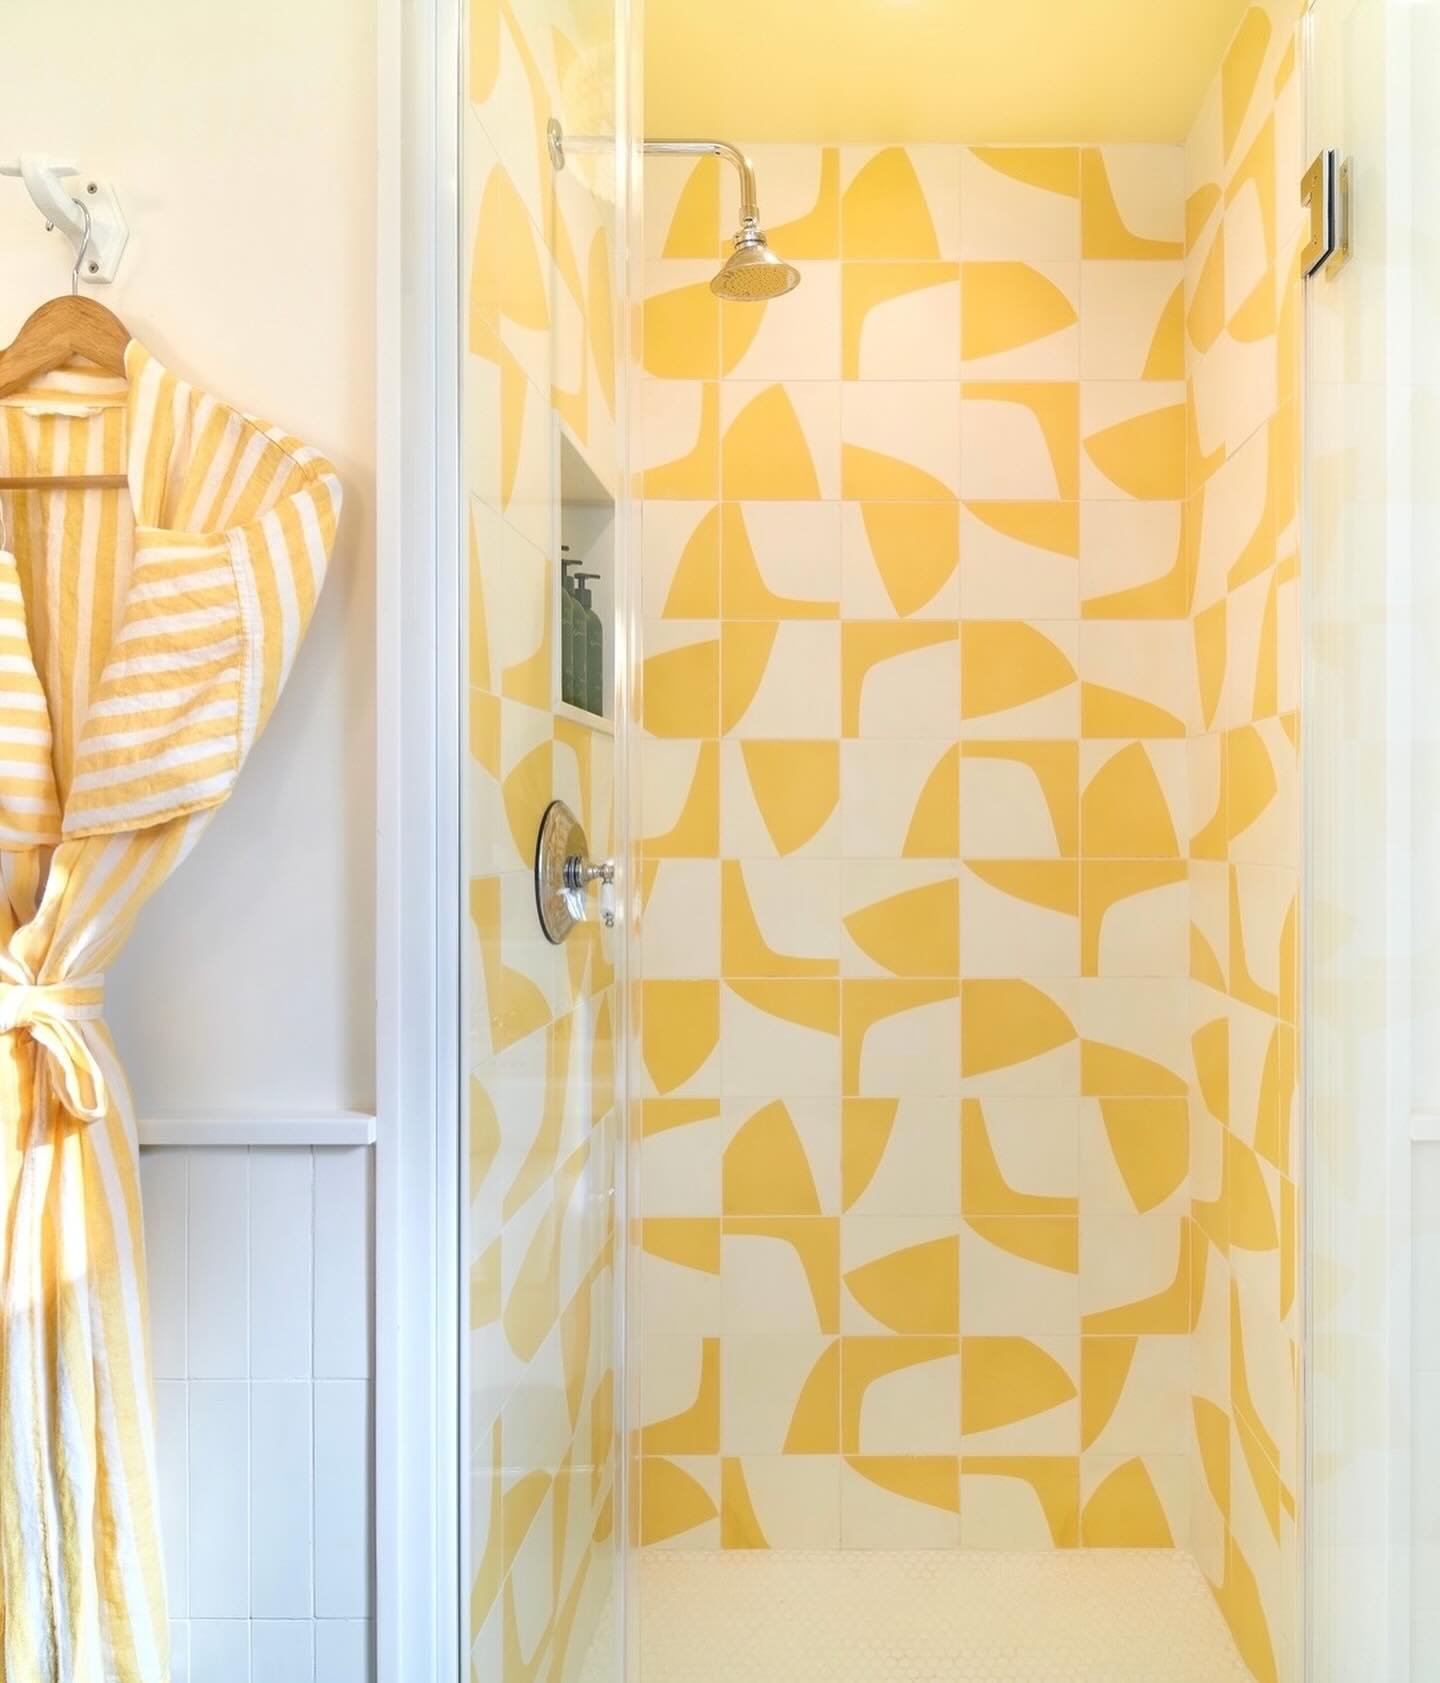 shower me in sunshine ☀️ //
⠀⠀⠀⠀⠀⠀⠀⠀⠀
〰️ we collaborated with @leroystreetstudio to create this custom yellow color for their project at @silversandsmotel as shown in our strands dwell tails mixed patterned tile ⚡️